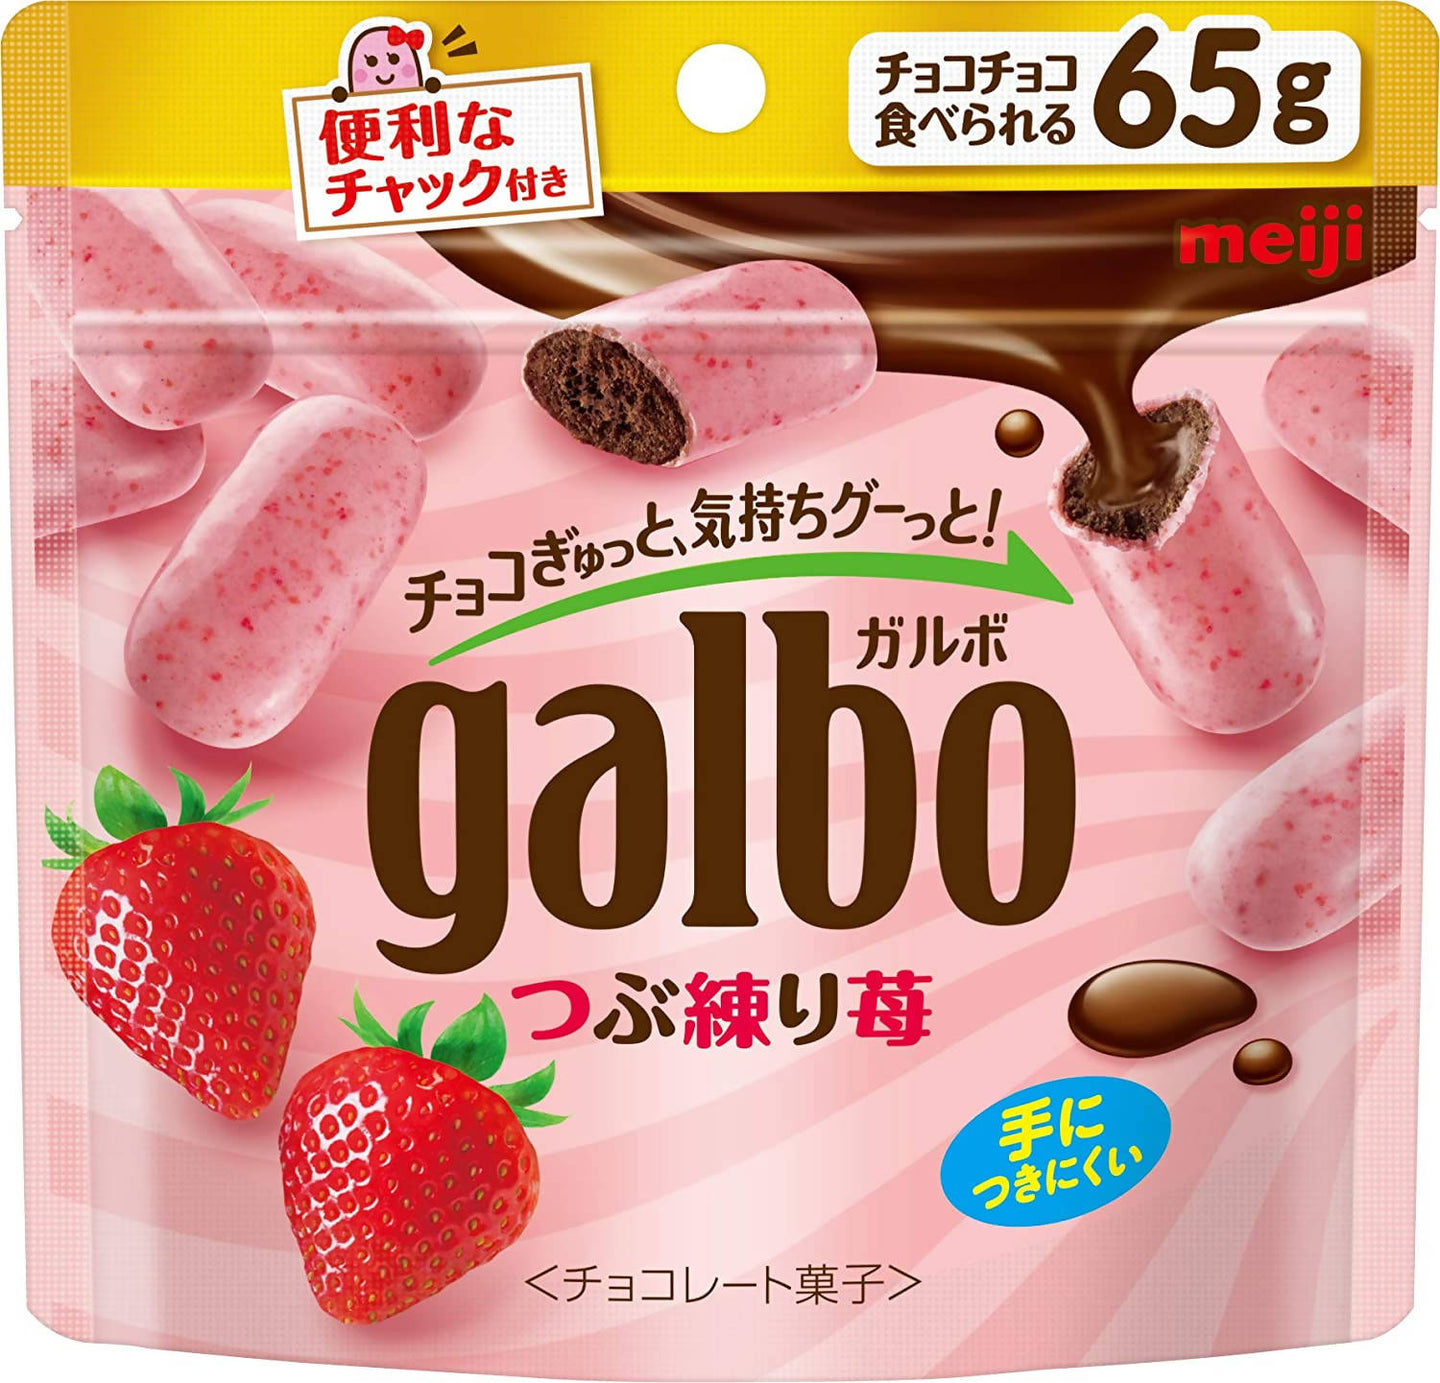 MEIJI Garbo Strawberry Pouch – 65g x 8 Bags – Value Pack